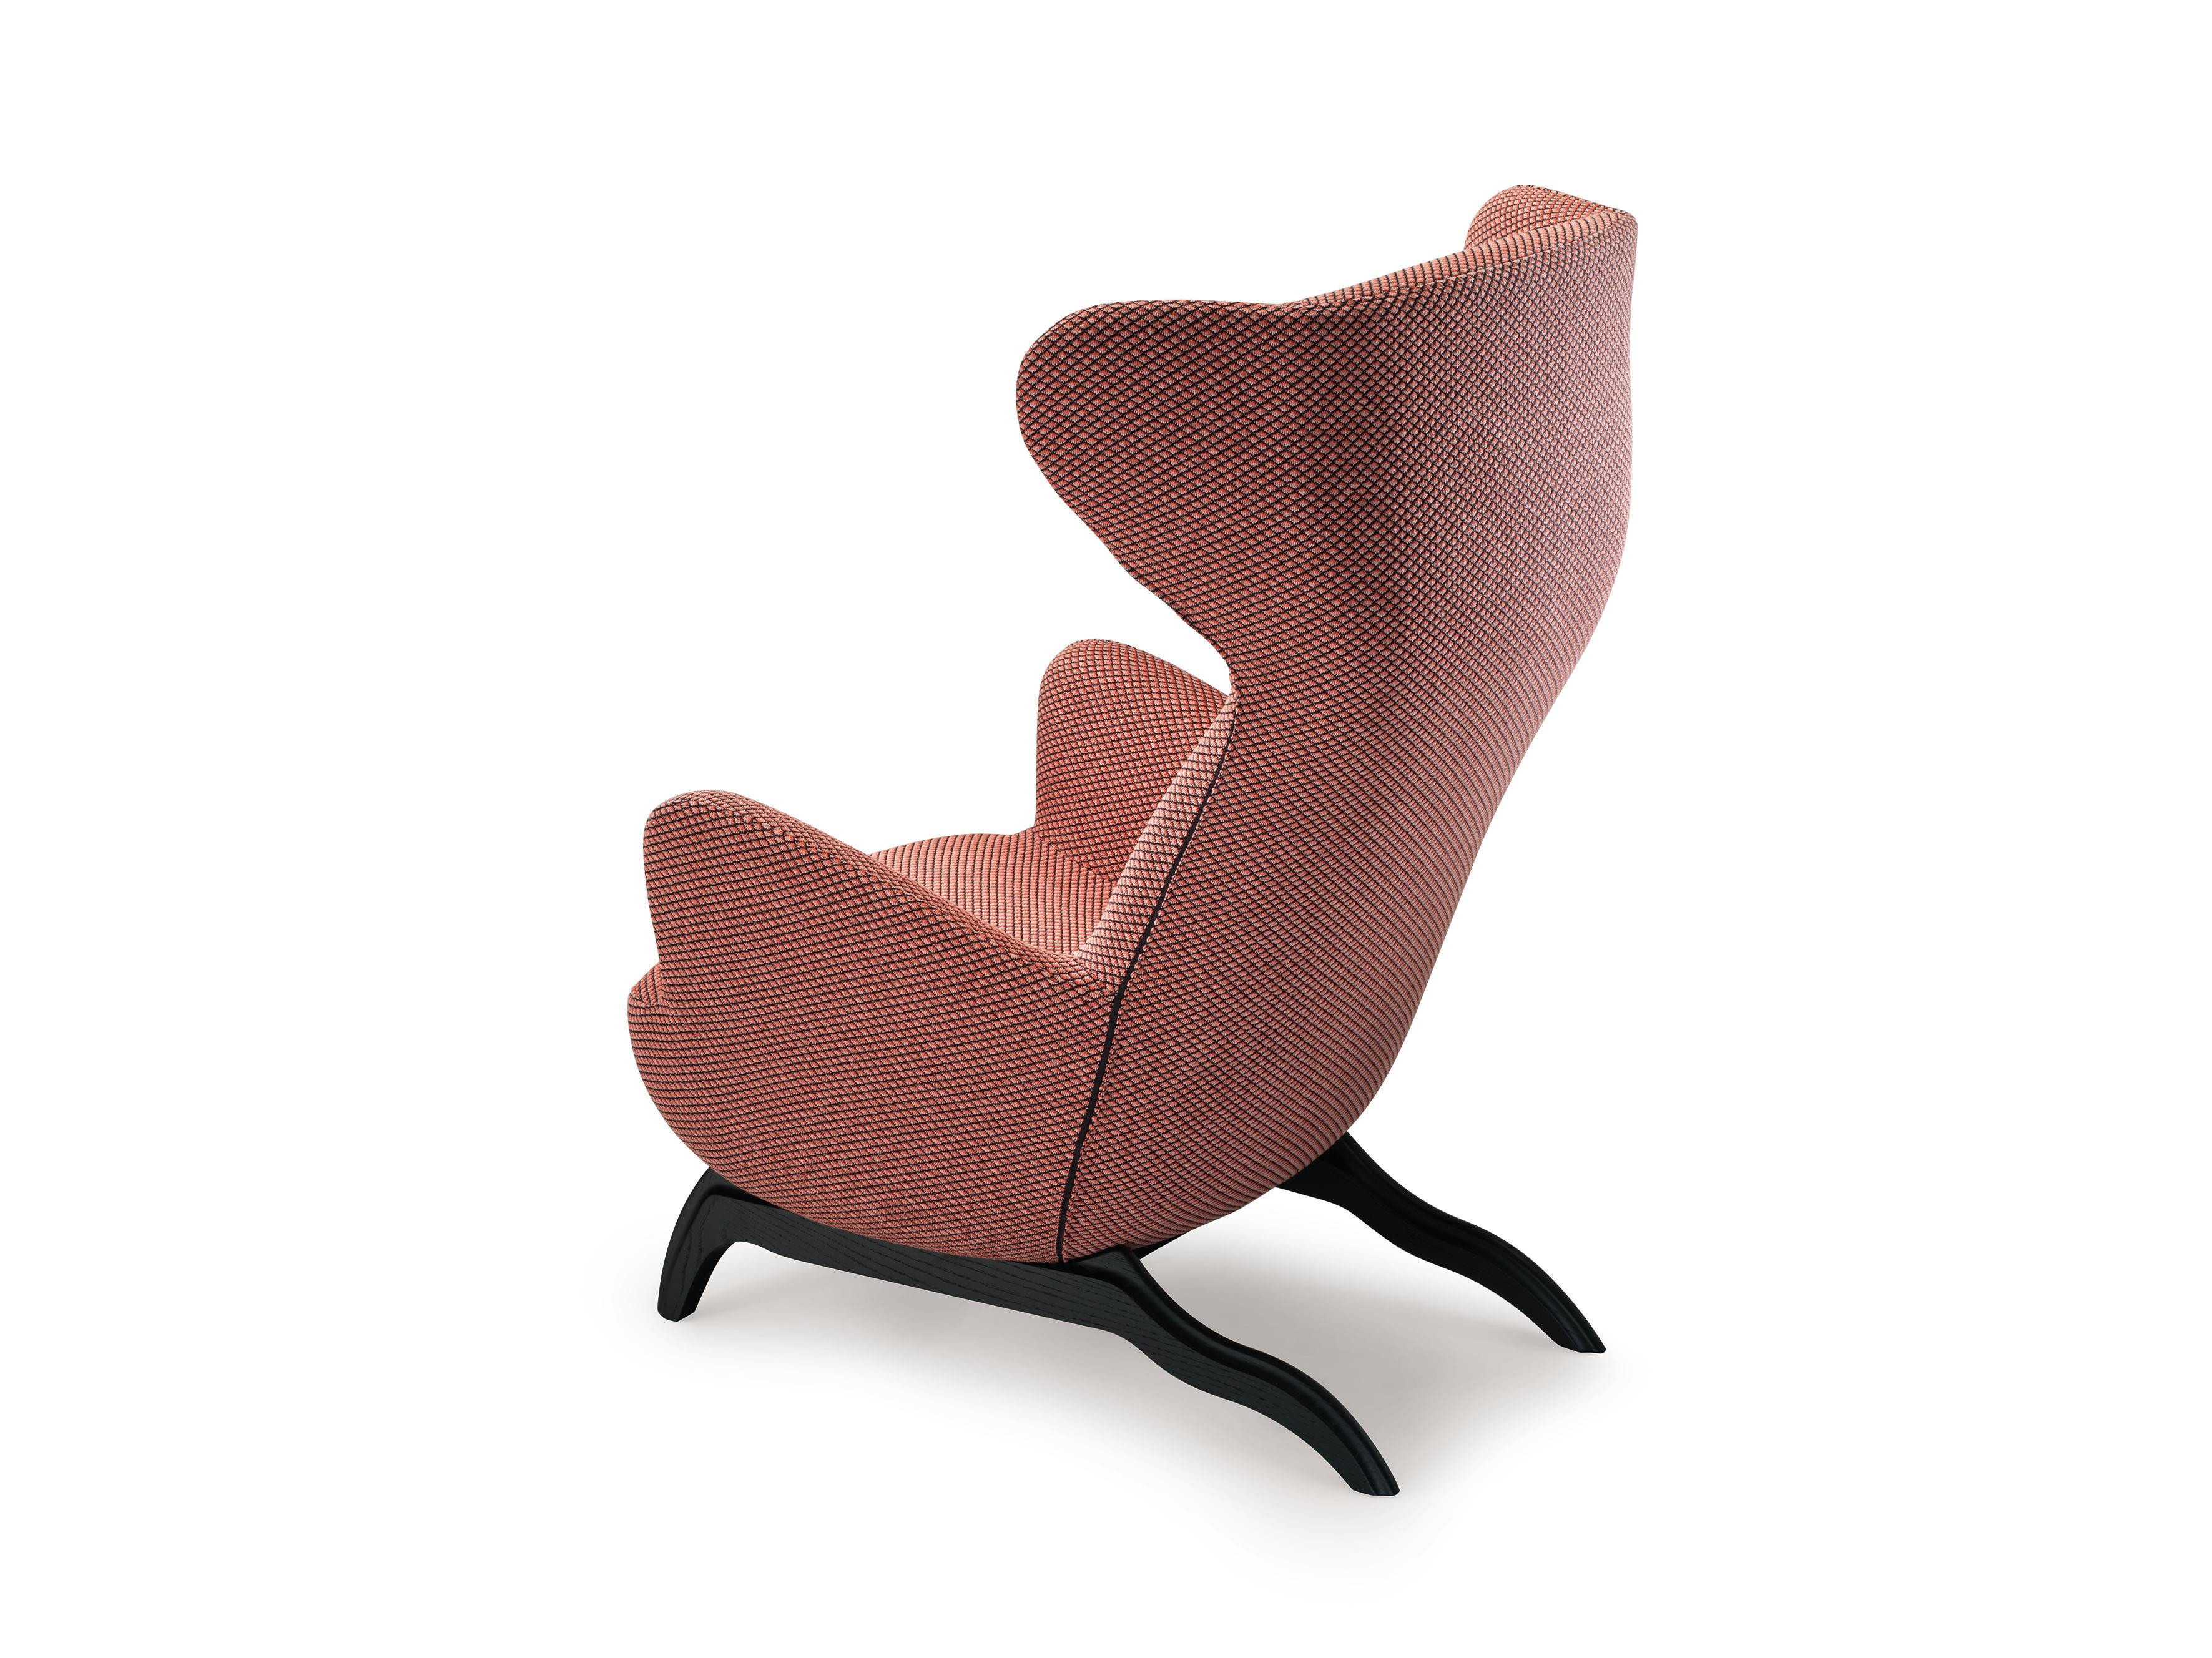 Zanotta Ardea CM Armchair in Red Tegola Upholstery with Black Varnished Oak by Carlo Mollino

Base in solid natural or black varnished oak, or in solid natural Canaletto walnut; wax-finished varnish. Steel frame, with elastic strips suspension.